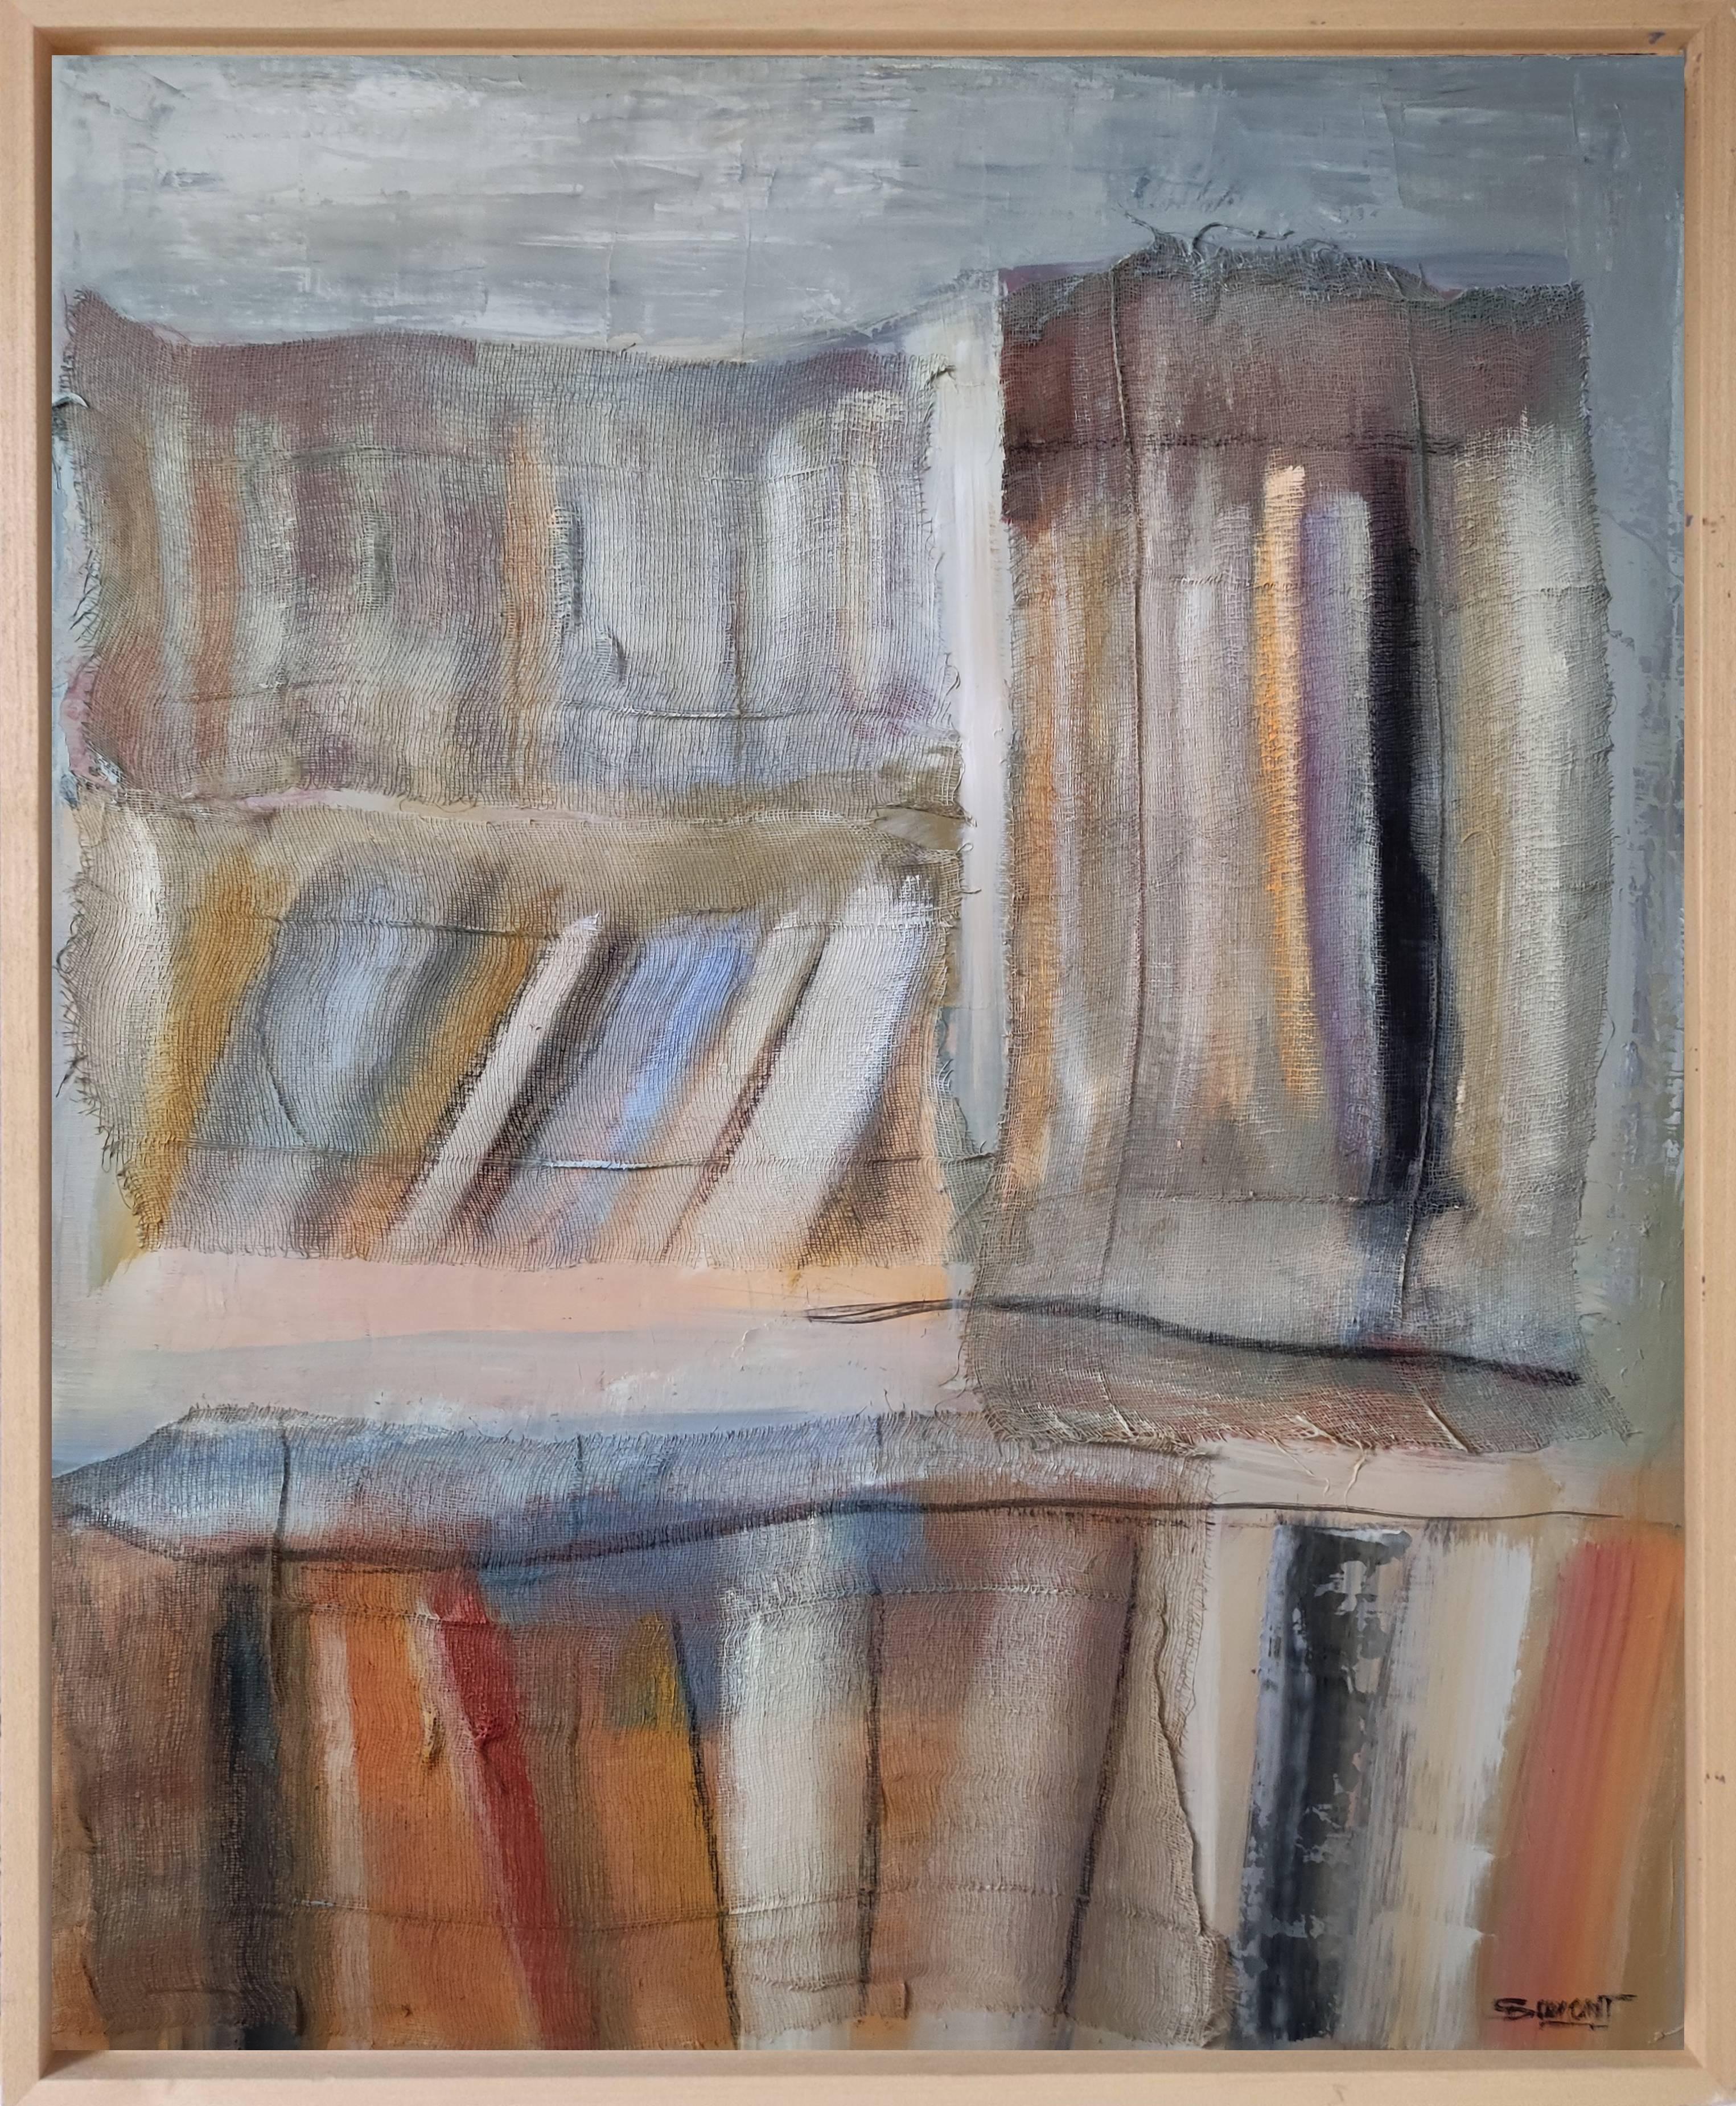 library 8, abstract, collage, books, oil on canvas, minimalism, expressionism